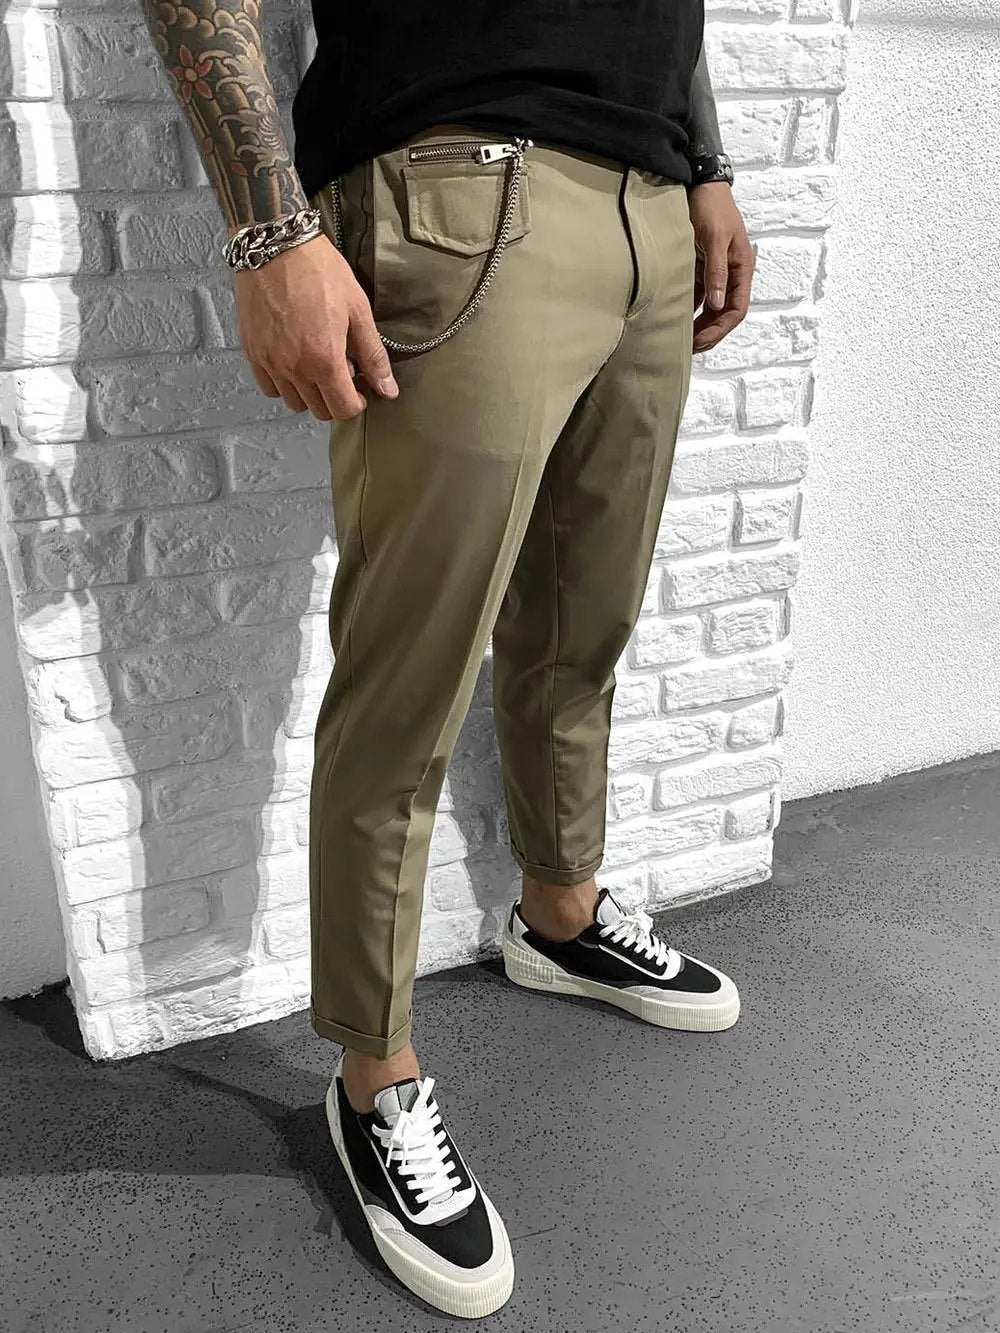 A man wearing GENTLEMAN'S ROLL UP - BEIGE pants is standing next to a brick wall, displaying hand-crafted details.